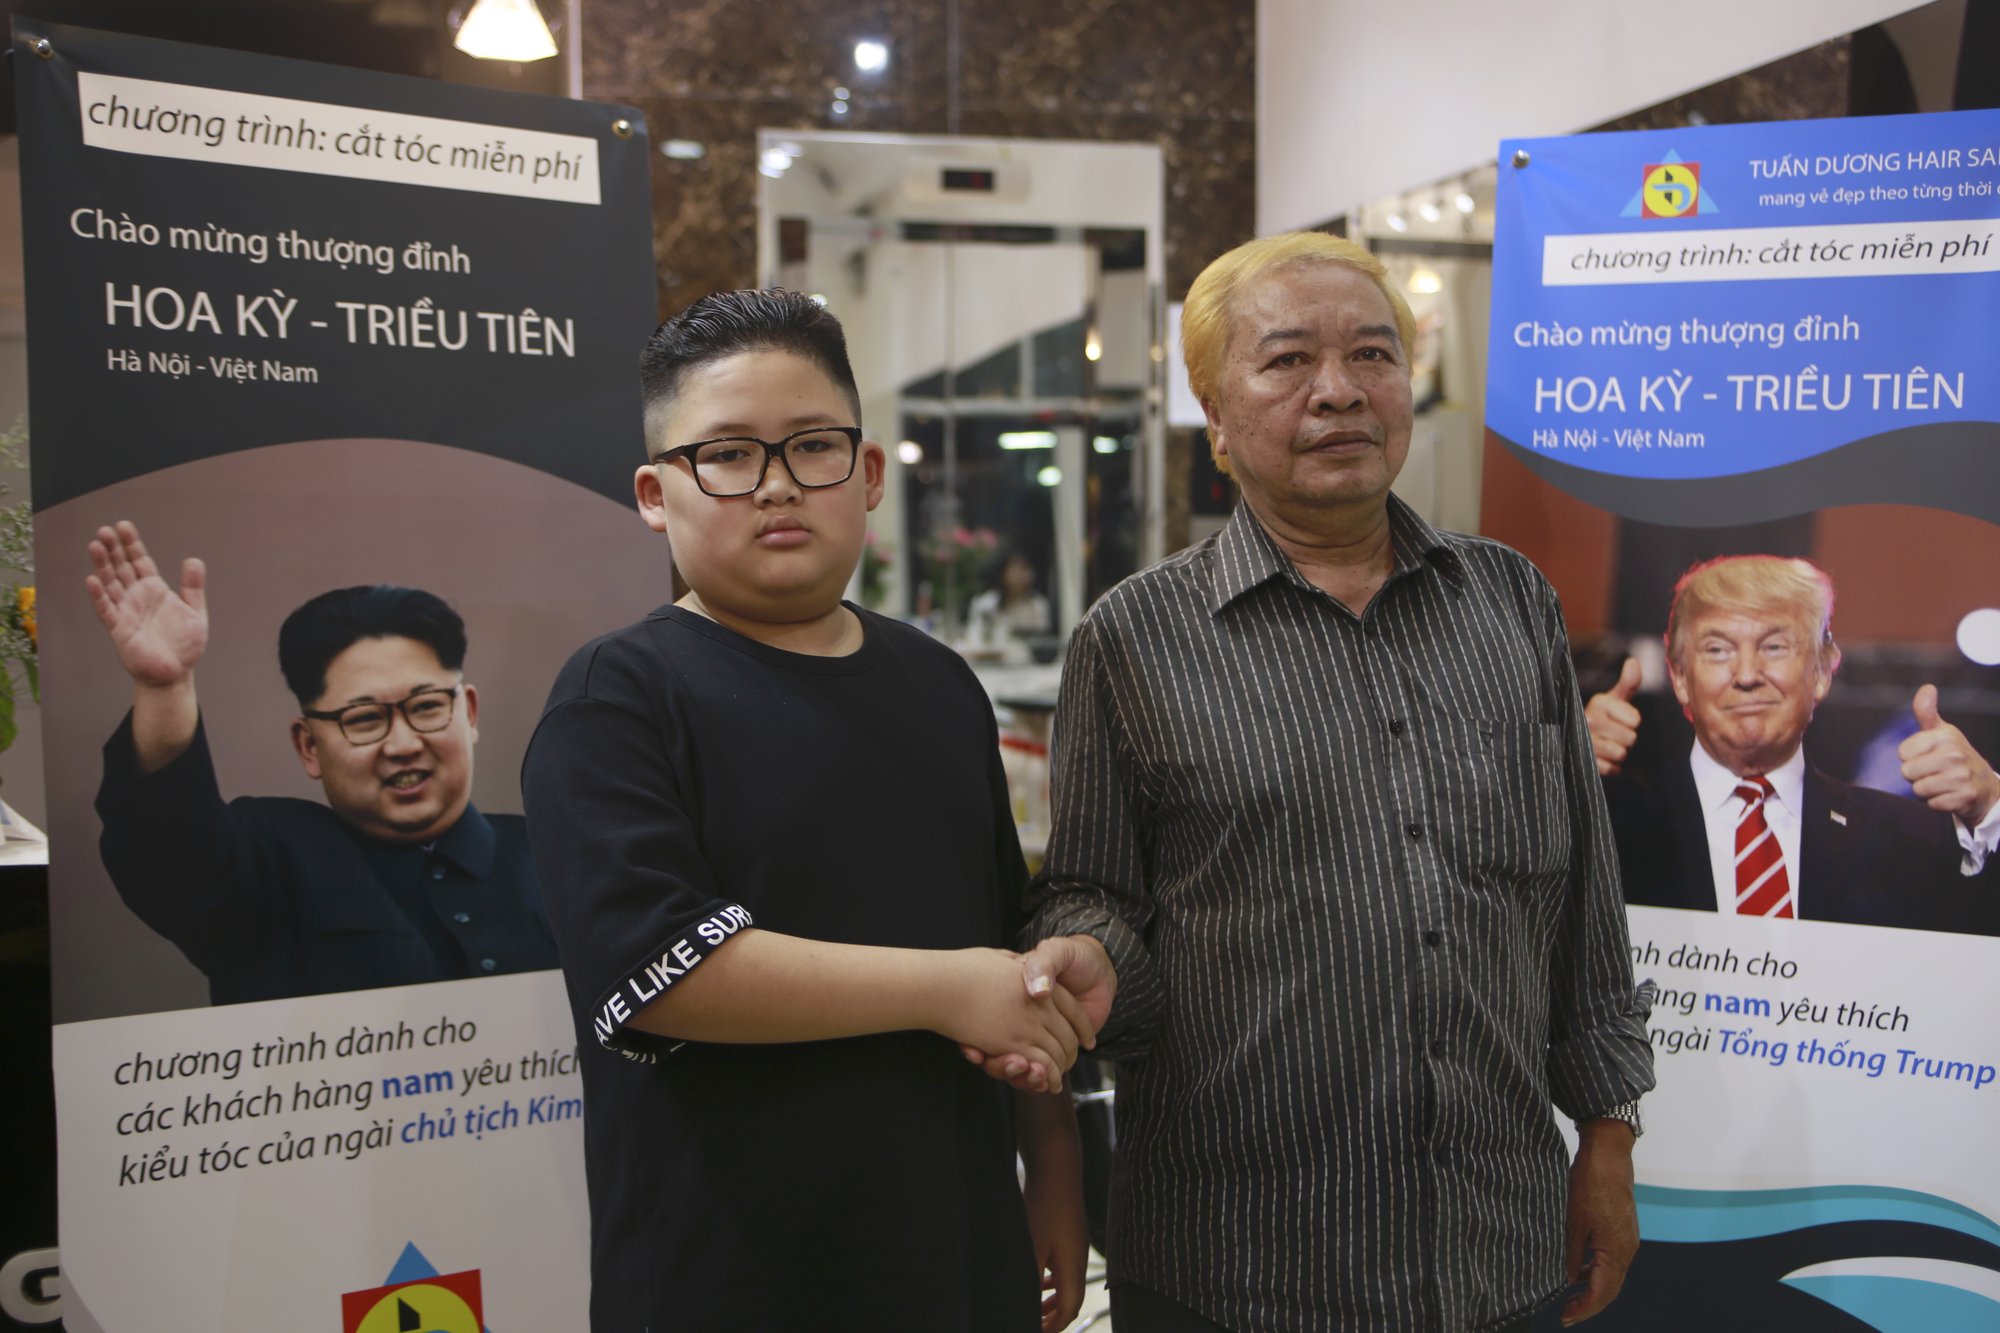 Le Phuc Hai, 66 and To Gia Huy, 9, pose for a photo after having Trump and Kim haircuts in Hanoi, Vietnam, on Tuesday, Feb.19, 2019. U.S. President Donald Trump and North Korean leader Kim Jong Un have become the latest style icons in Hanoi, a week before their second summit is to be held in the capital city of Vietnam.(AP Photo/Hau Dinh)